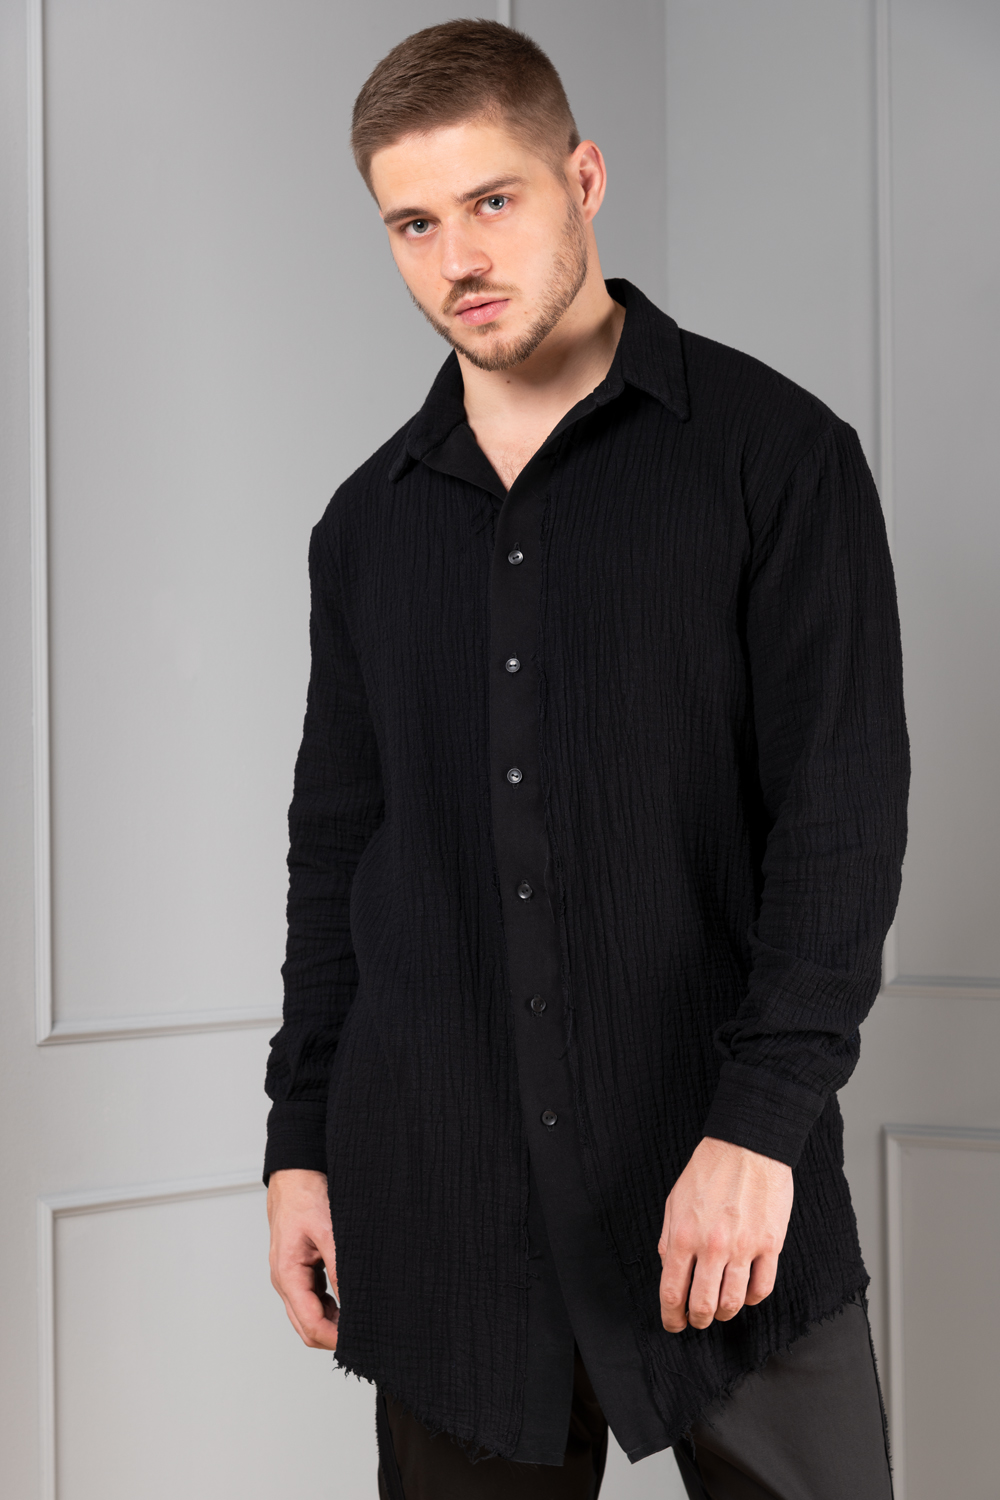 A black button-up unisex shirt with very relaxed cut | Haruco-vert